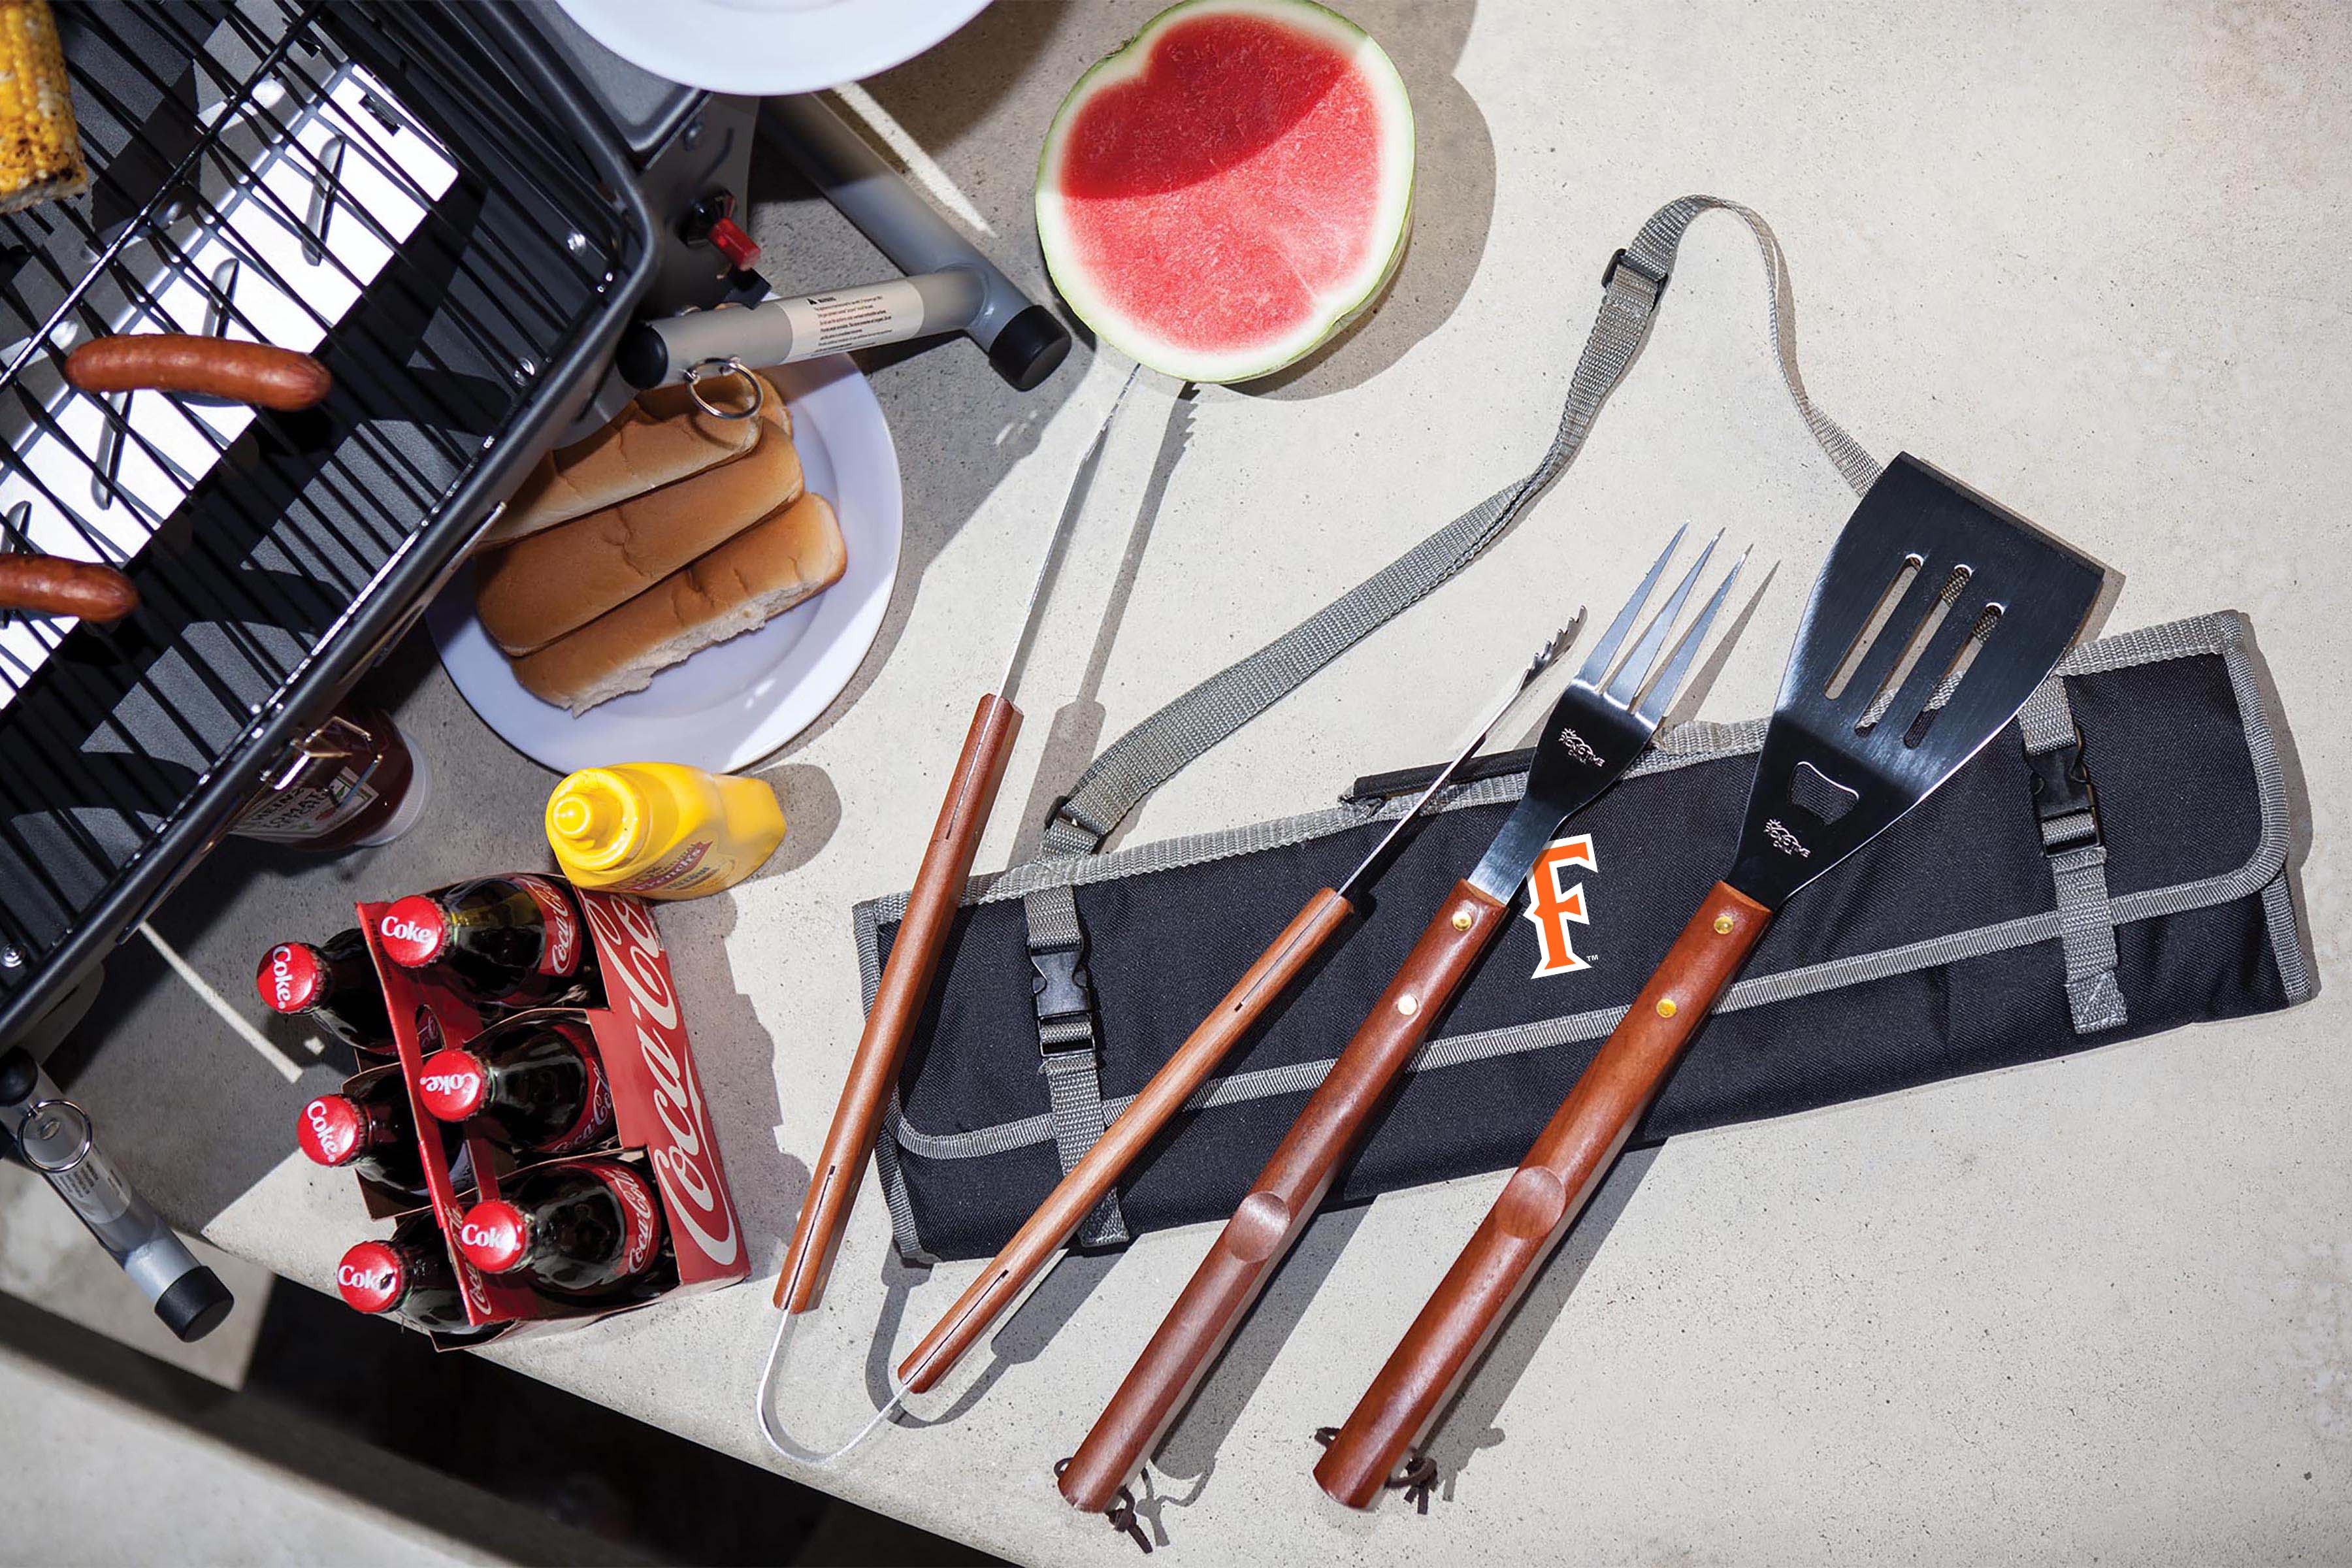 Cal State Fullerton Titans - 3-Piece BBQ Tote & Grill Set